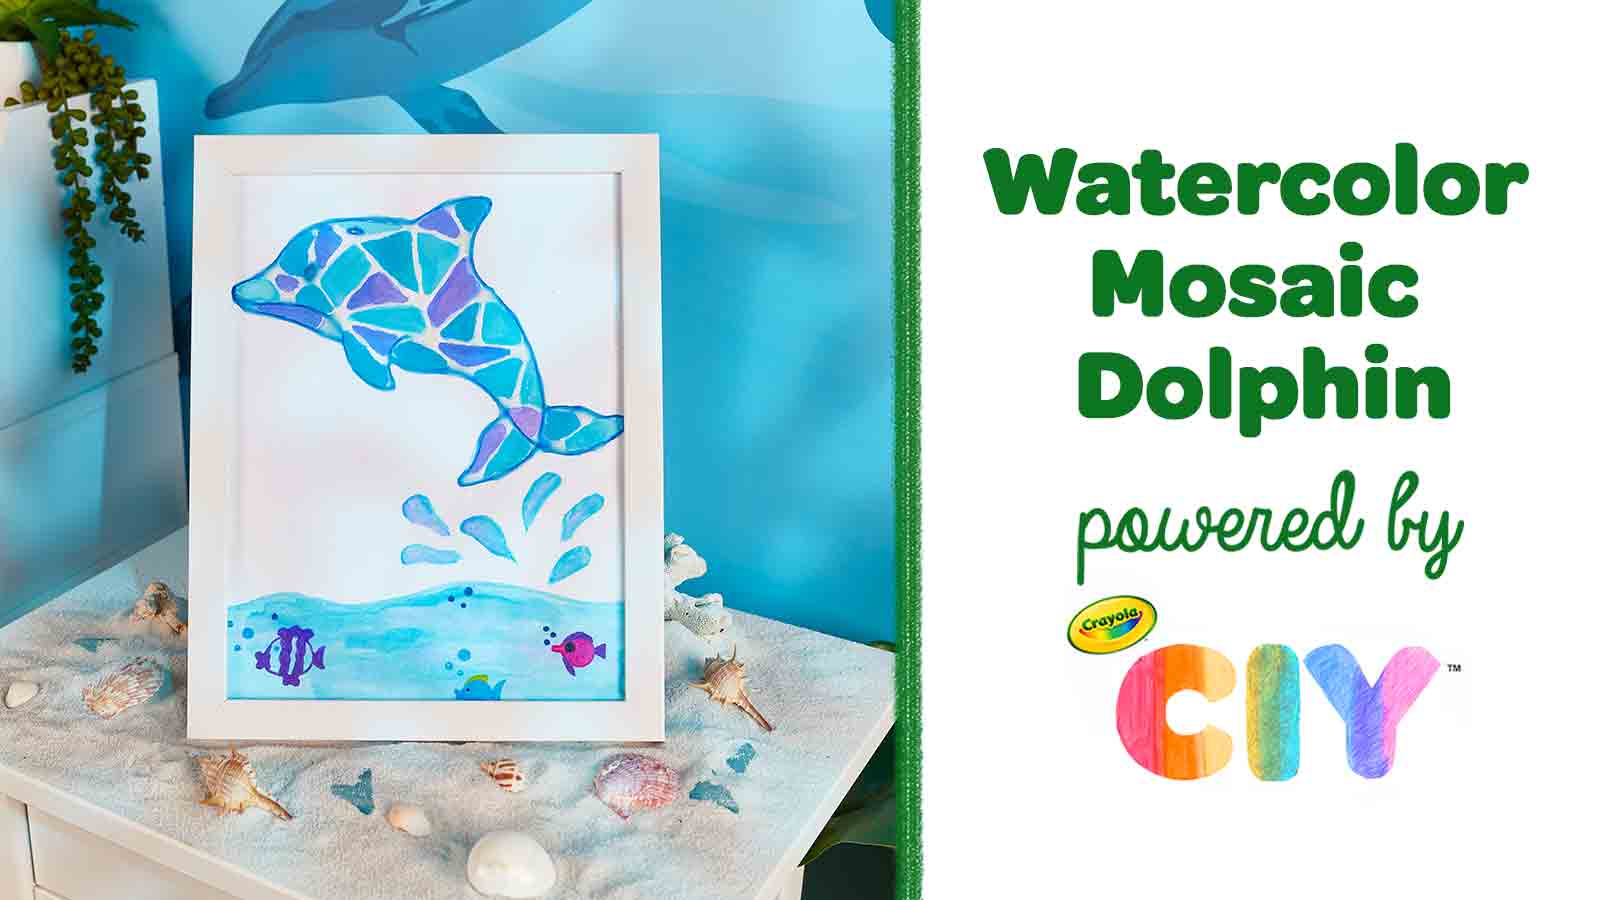 https://www.crayola.com/-/media/Crafts-New/Poster-Frames/Watercolor-Mosaic-Dolphin_Poster-Frame.jpg